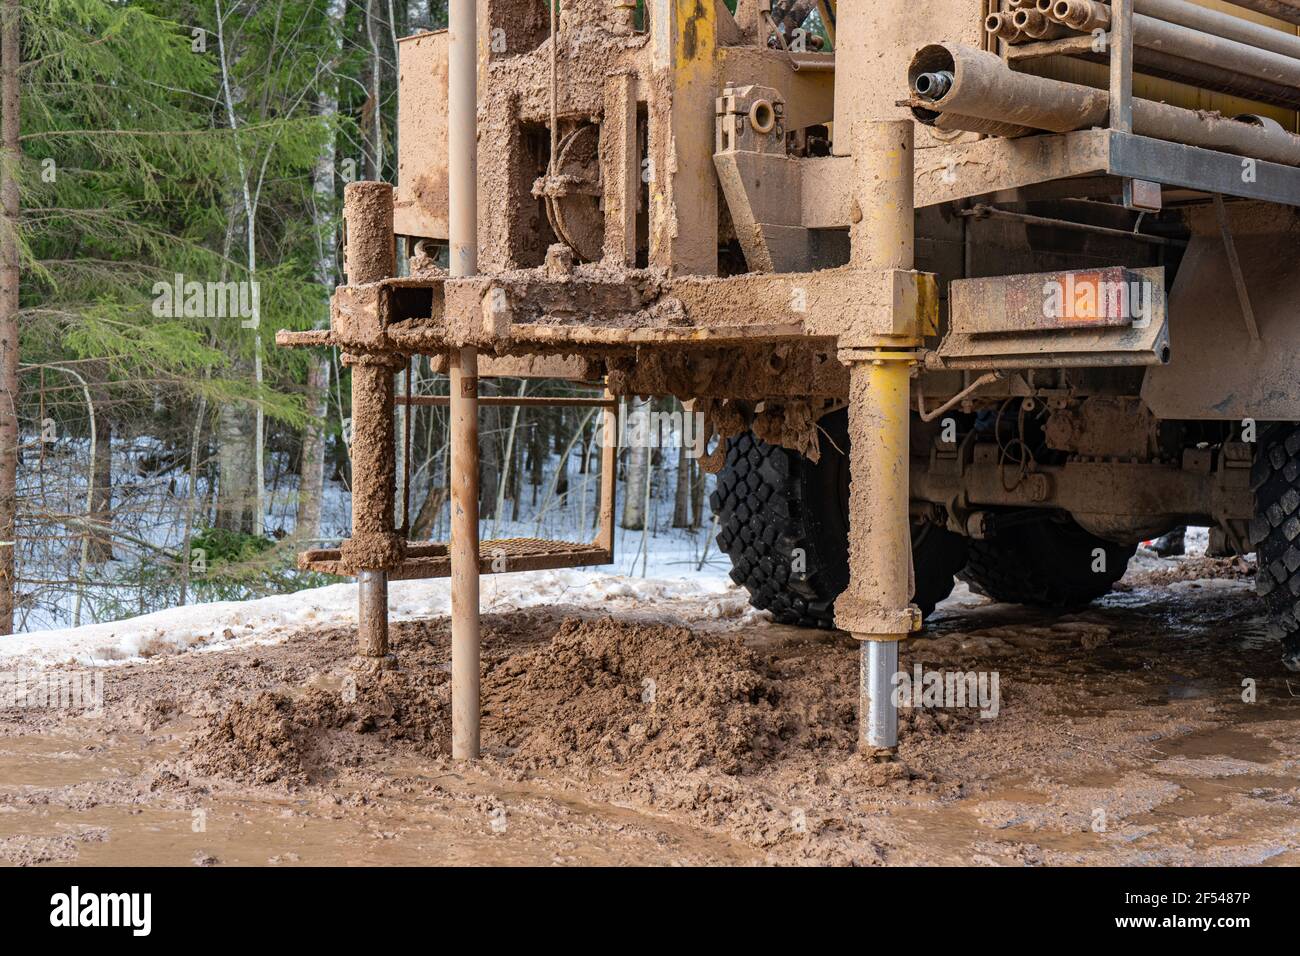 Drilling rig on a truck. Drilling geotechnical wells for water supply. Civil Water Well Drilling Rig Stock Photo